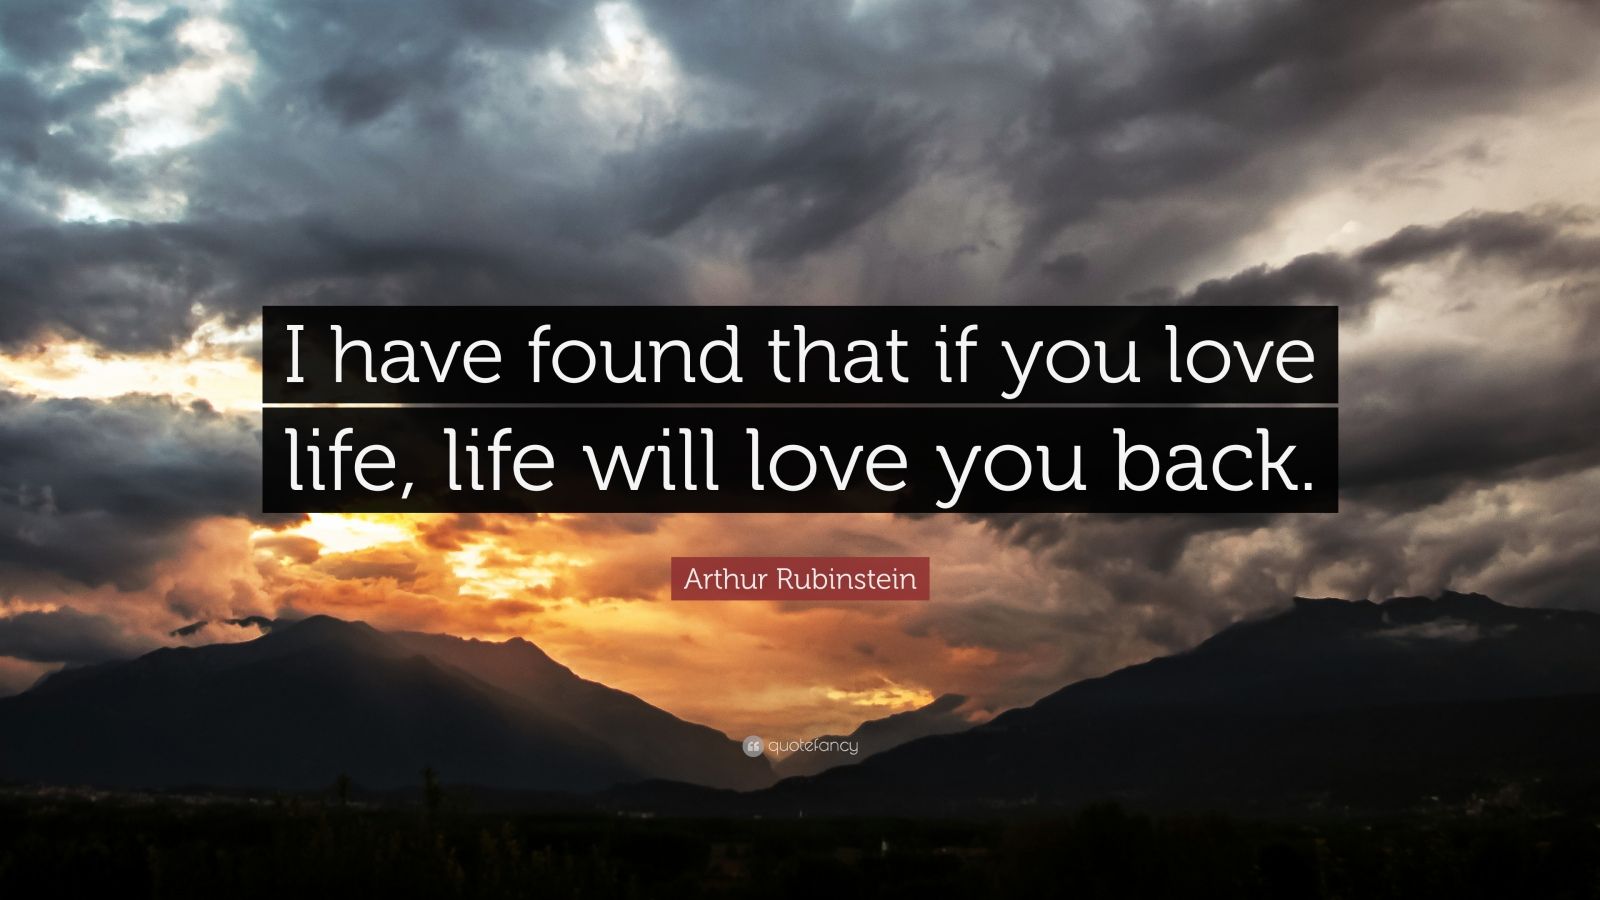 Arthur Rubinstein Quote: "I have found that if you love life, life will love you back." (24 ...